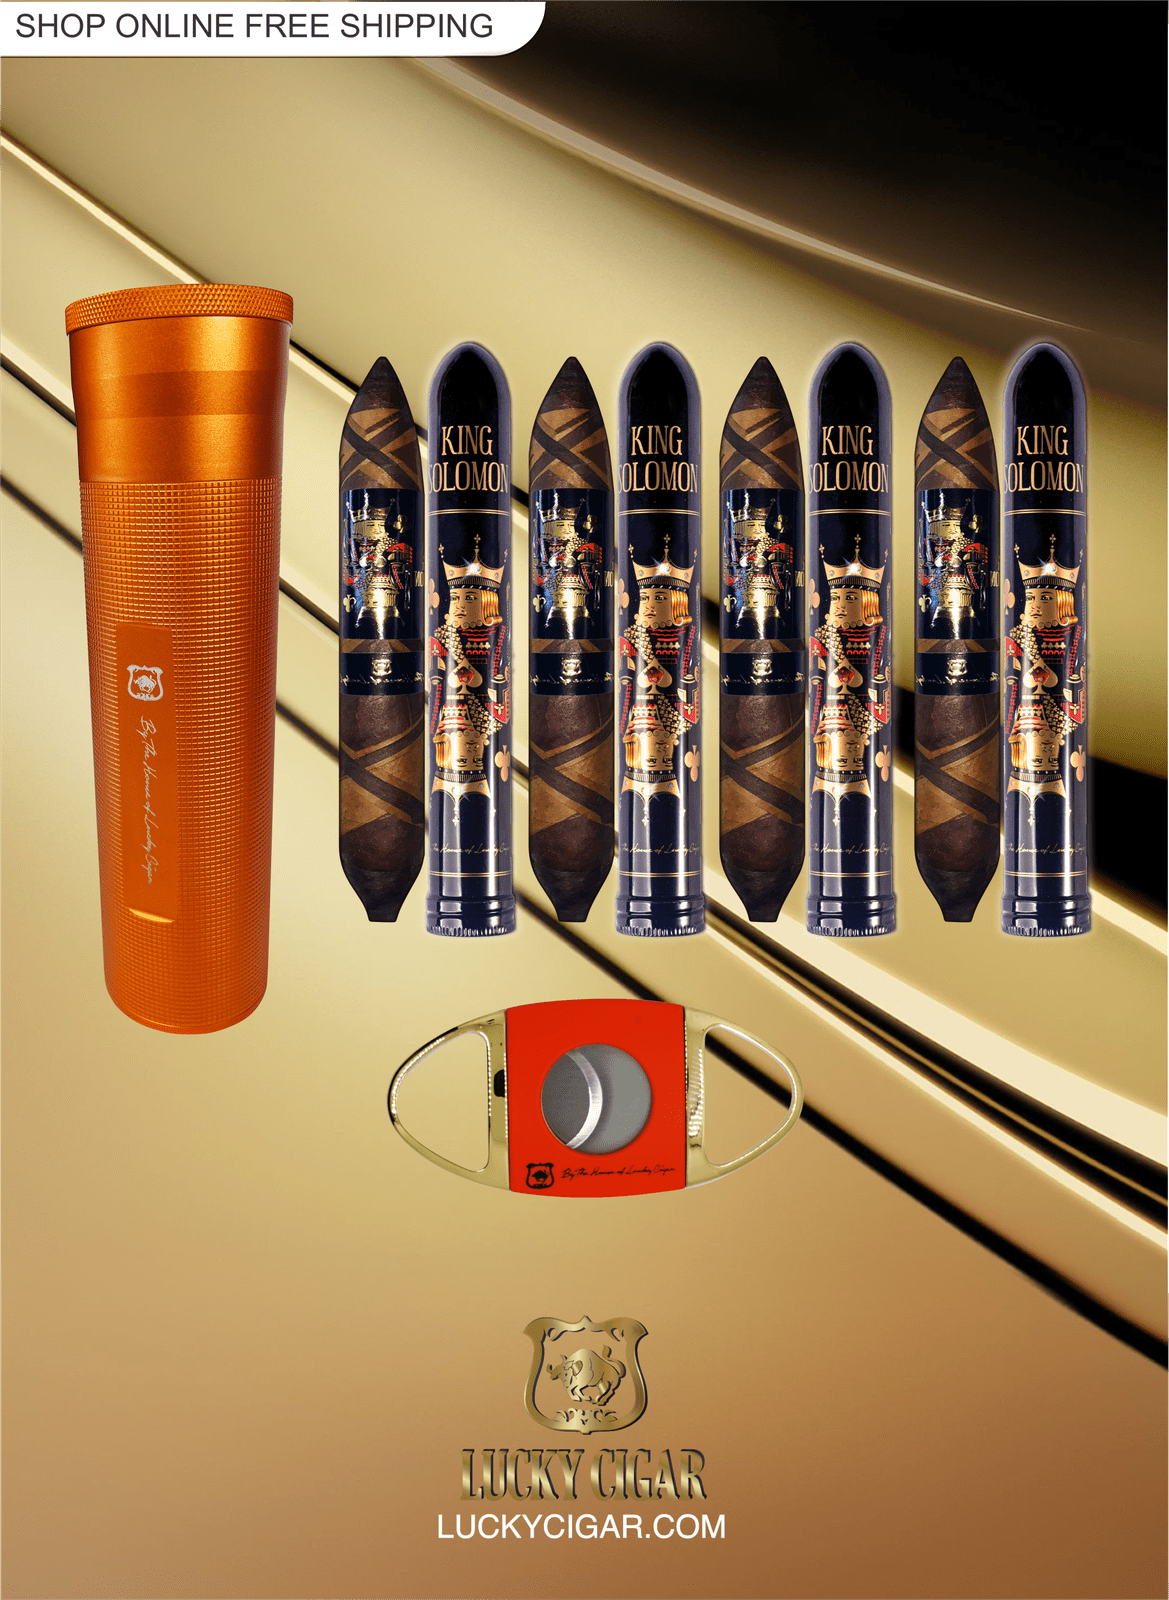 From The King Solomon Series: 4 Solomon 7x60 Cigars with Travel Humidor